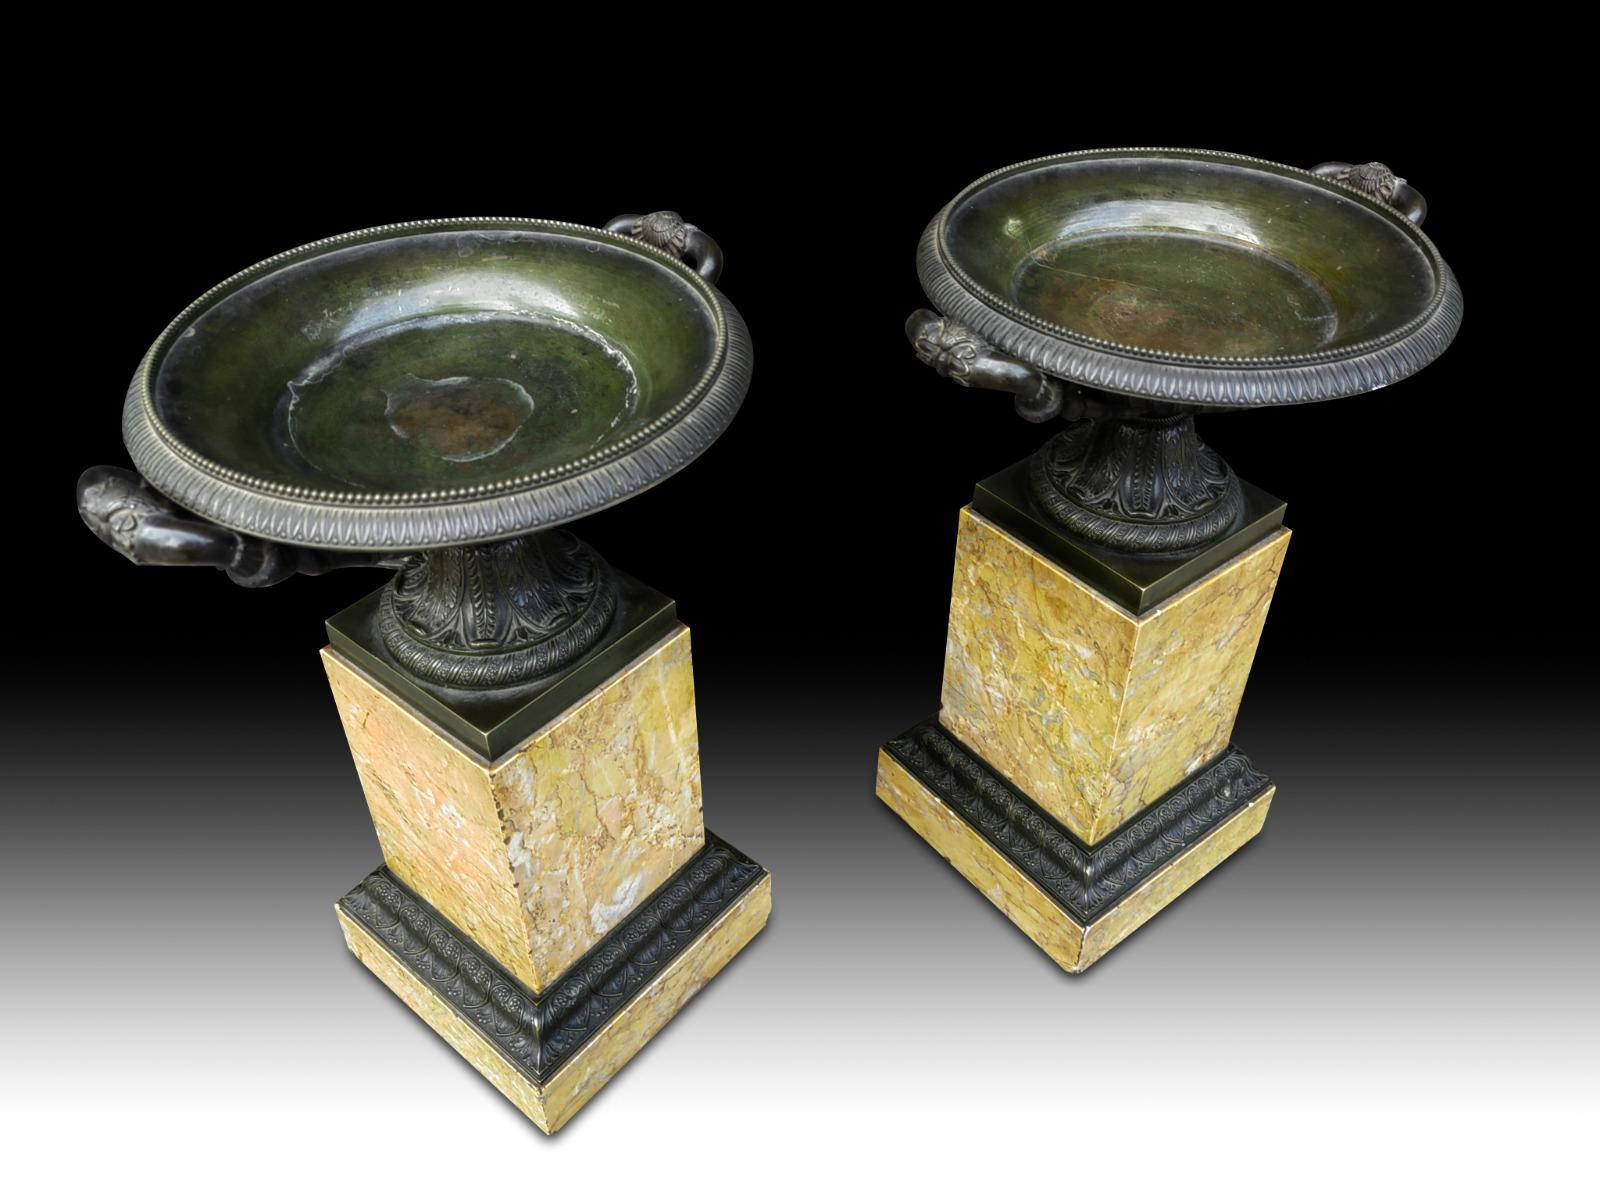 Pair of 19th century cups. In very good condition. The bronze has a fine chiselure. Beautiful patina.
Good condition.